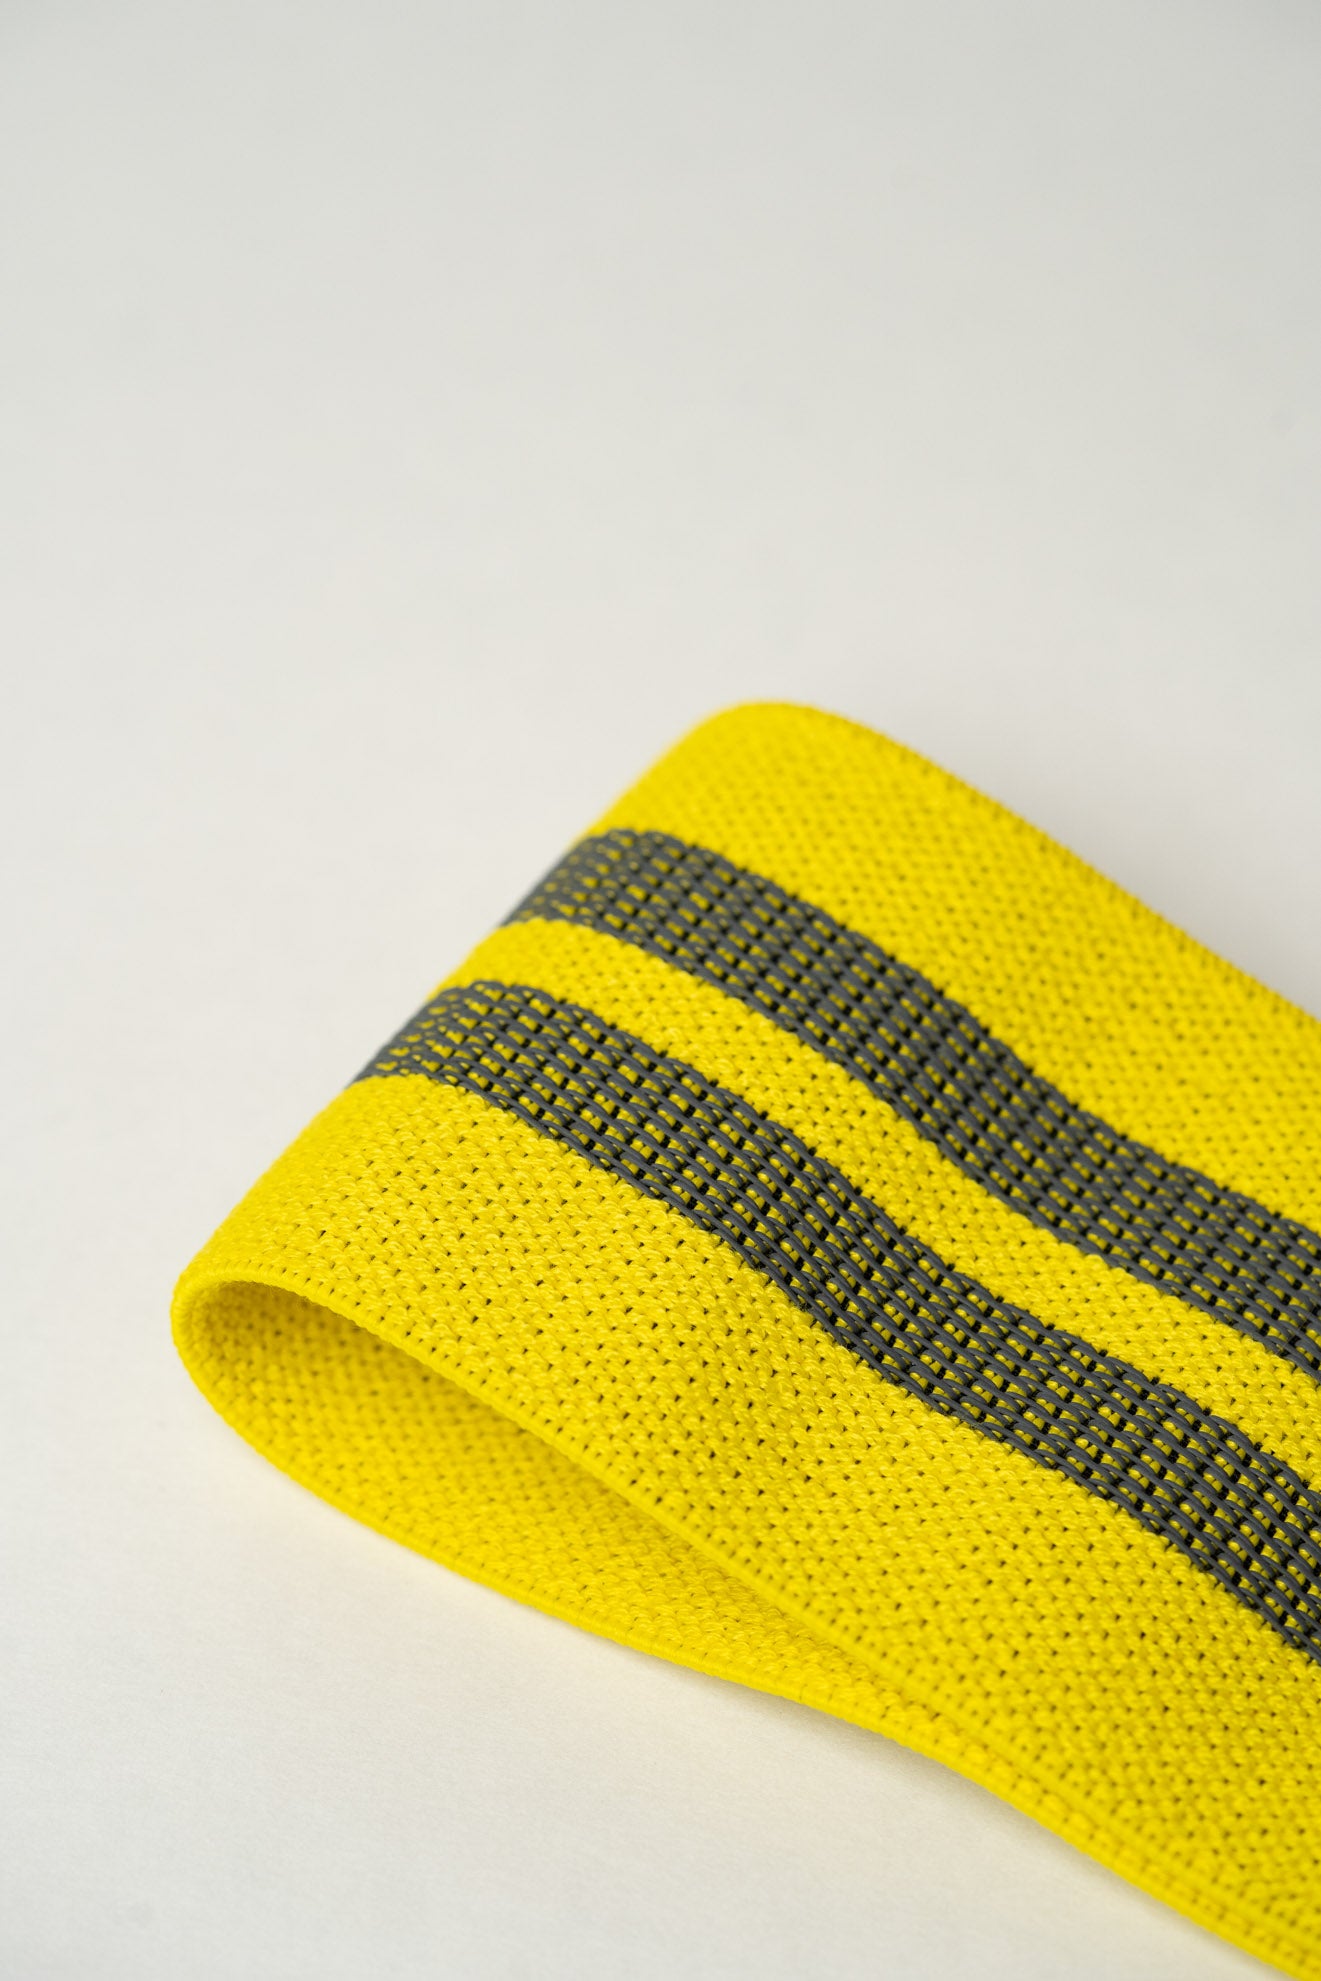 inside ofuppper hip resistance band yellow